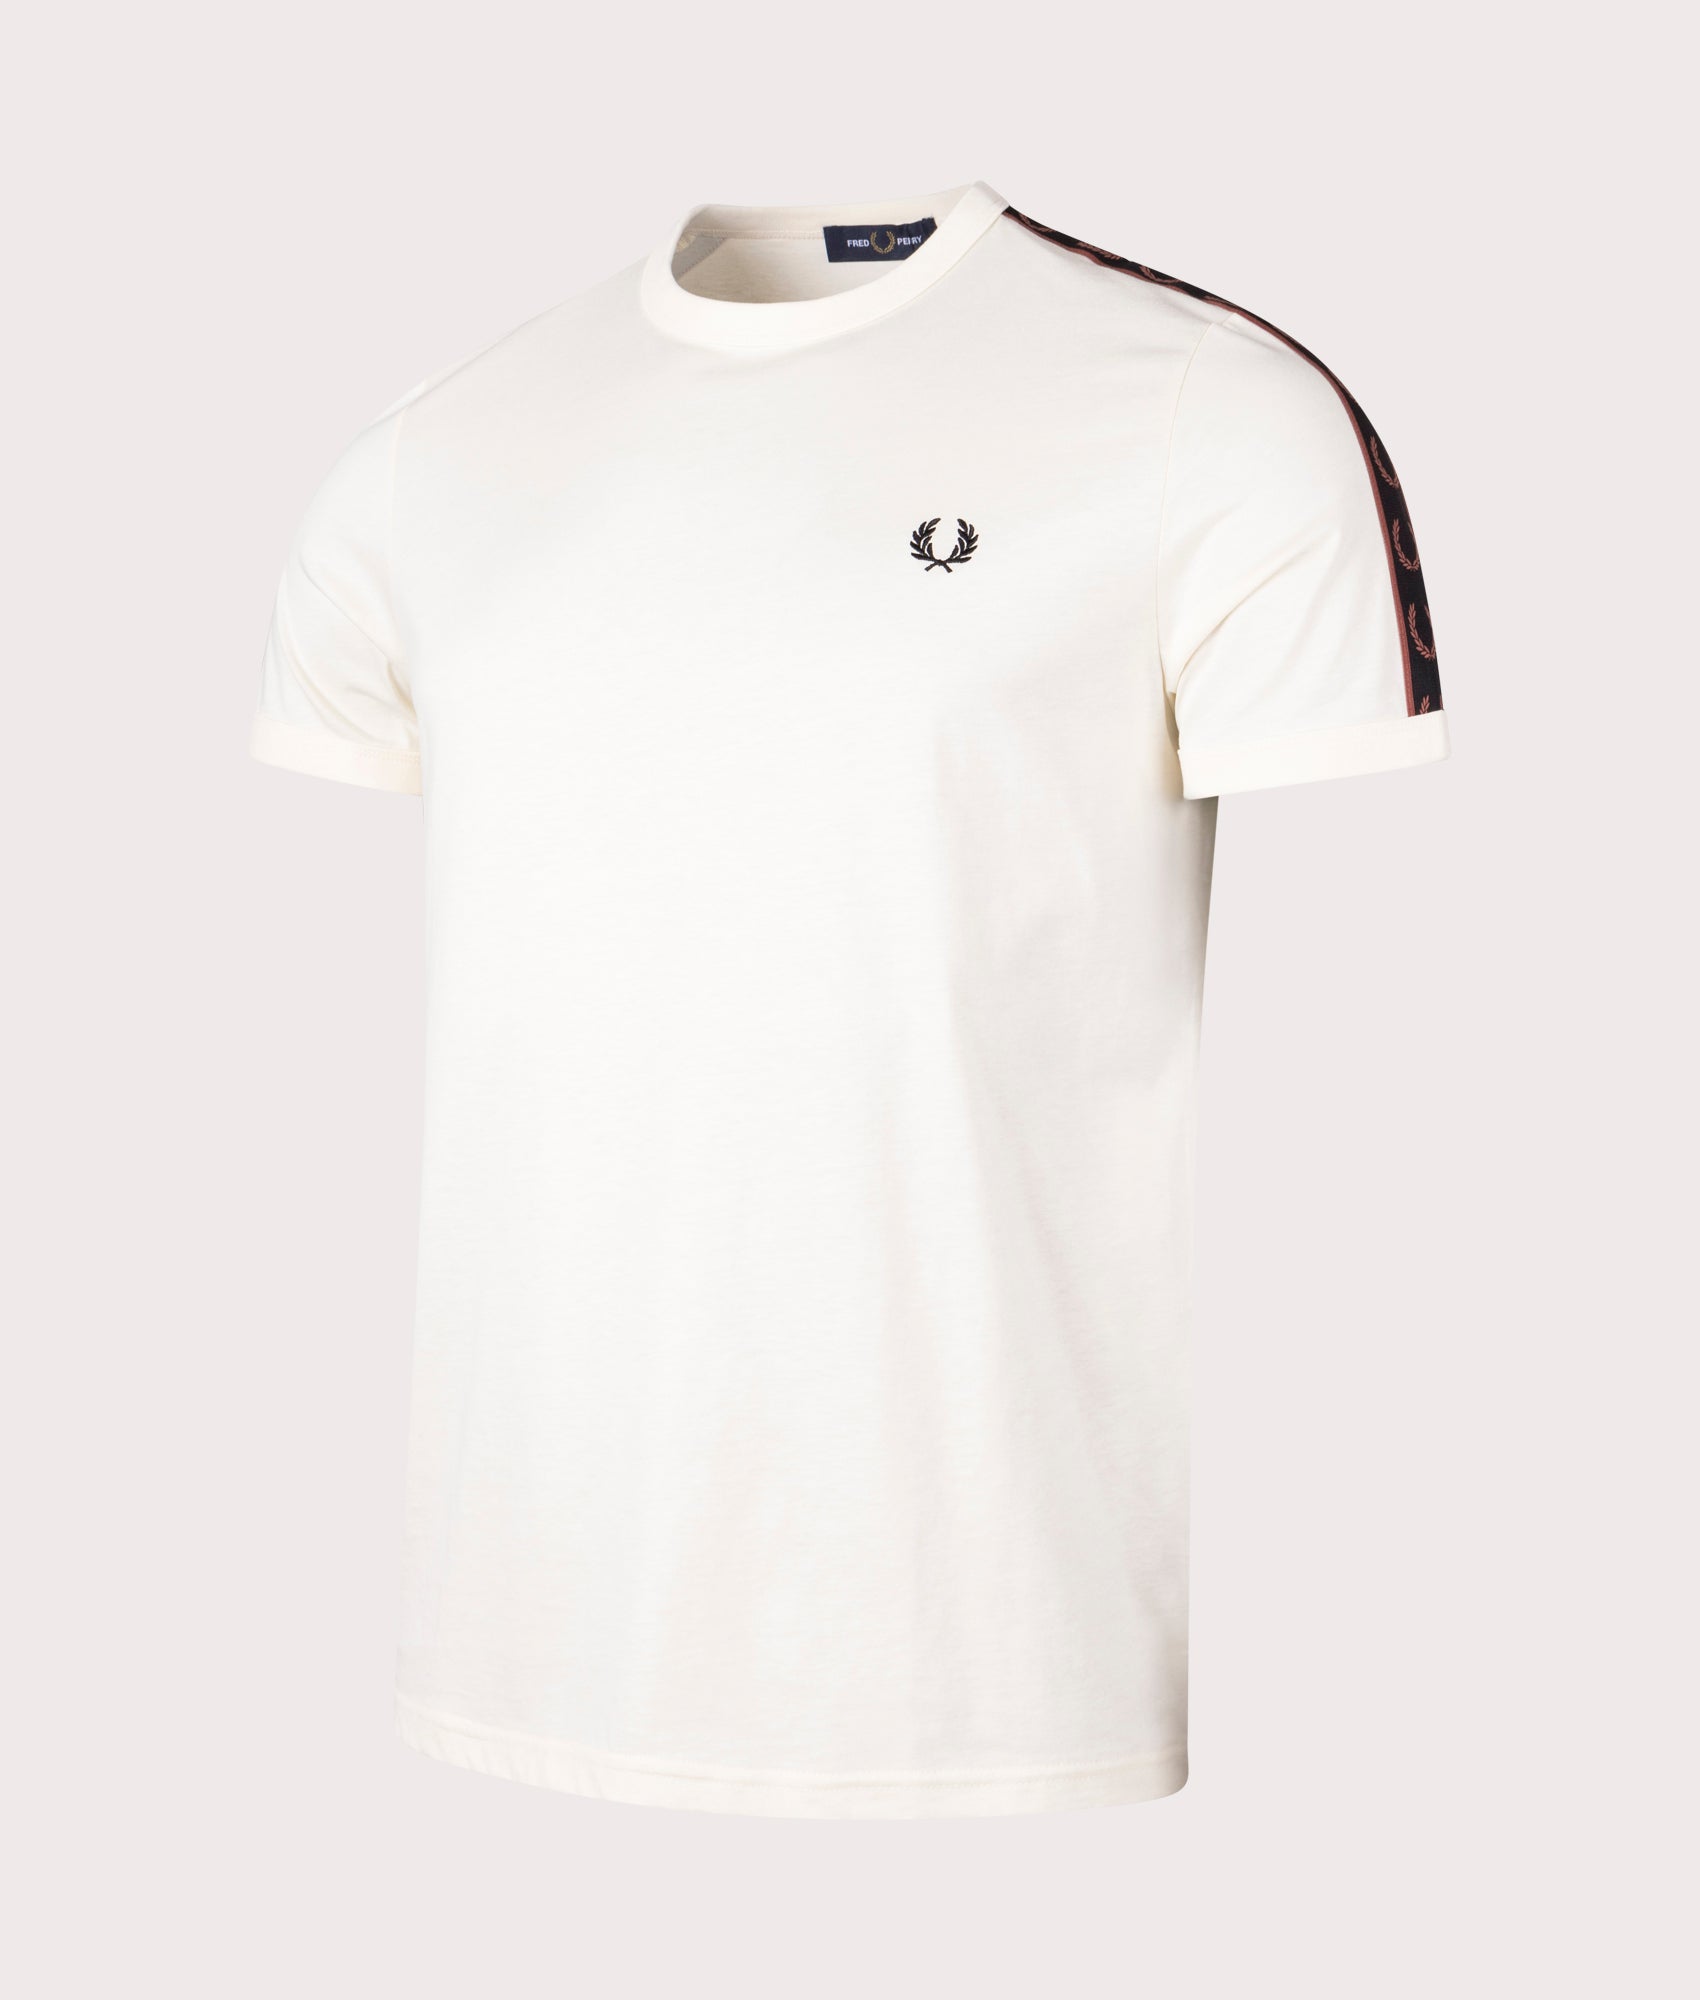 Fred Perry Mens Contrast Tape Ringer T-Shirt - Colour: U09 Ecru/Whisky Brwn - Size: XL